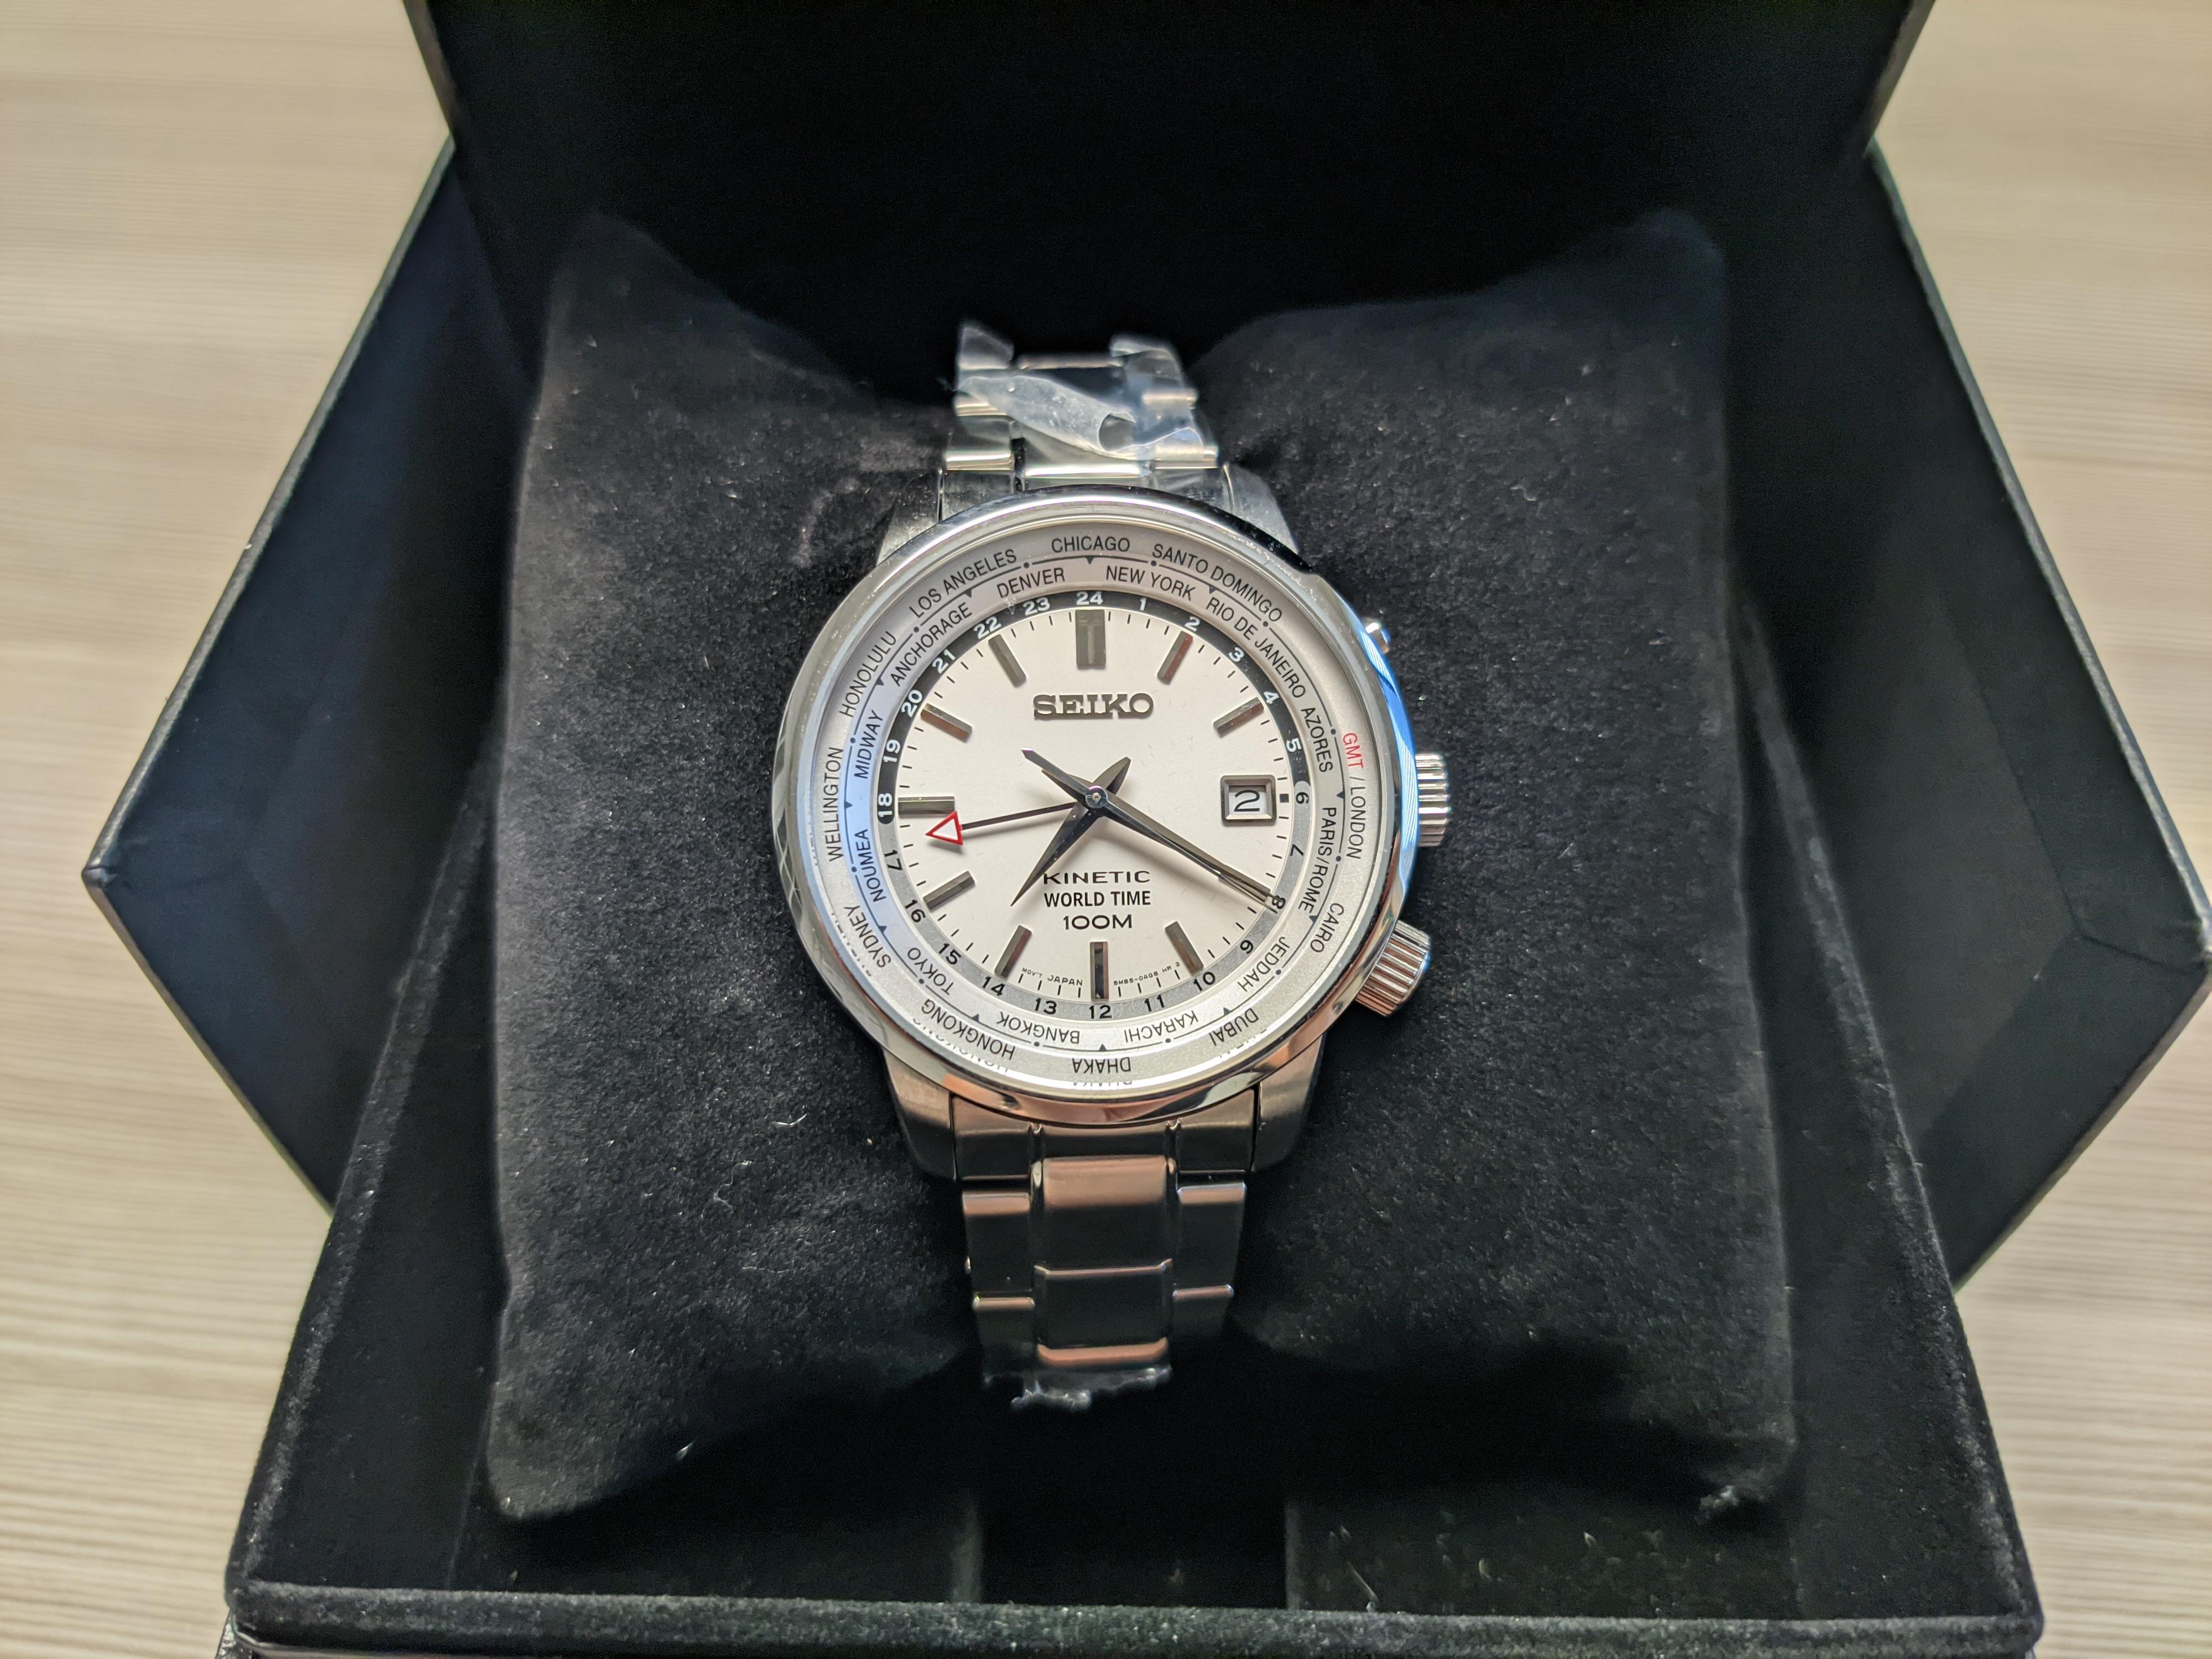 WTS] SUN067 Kinetic World Time GMT | WatchCharts